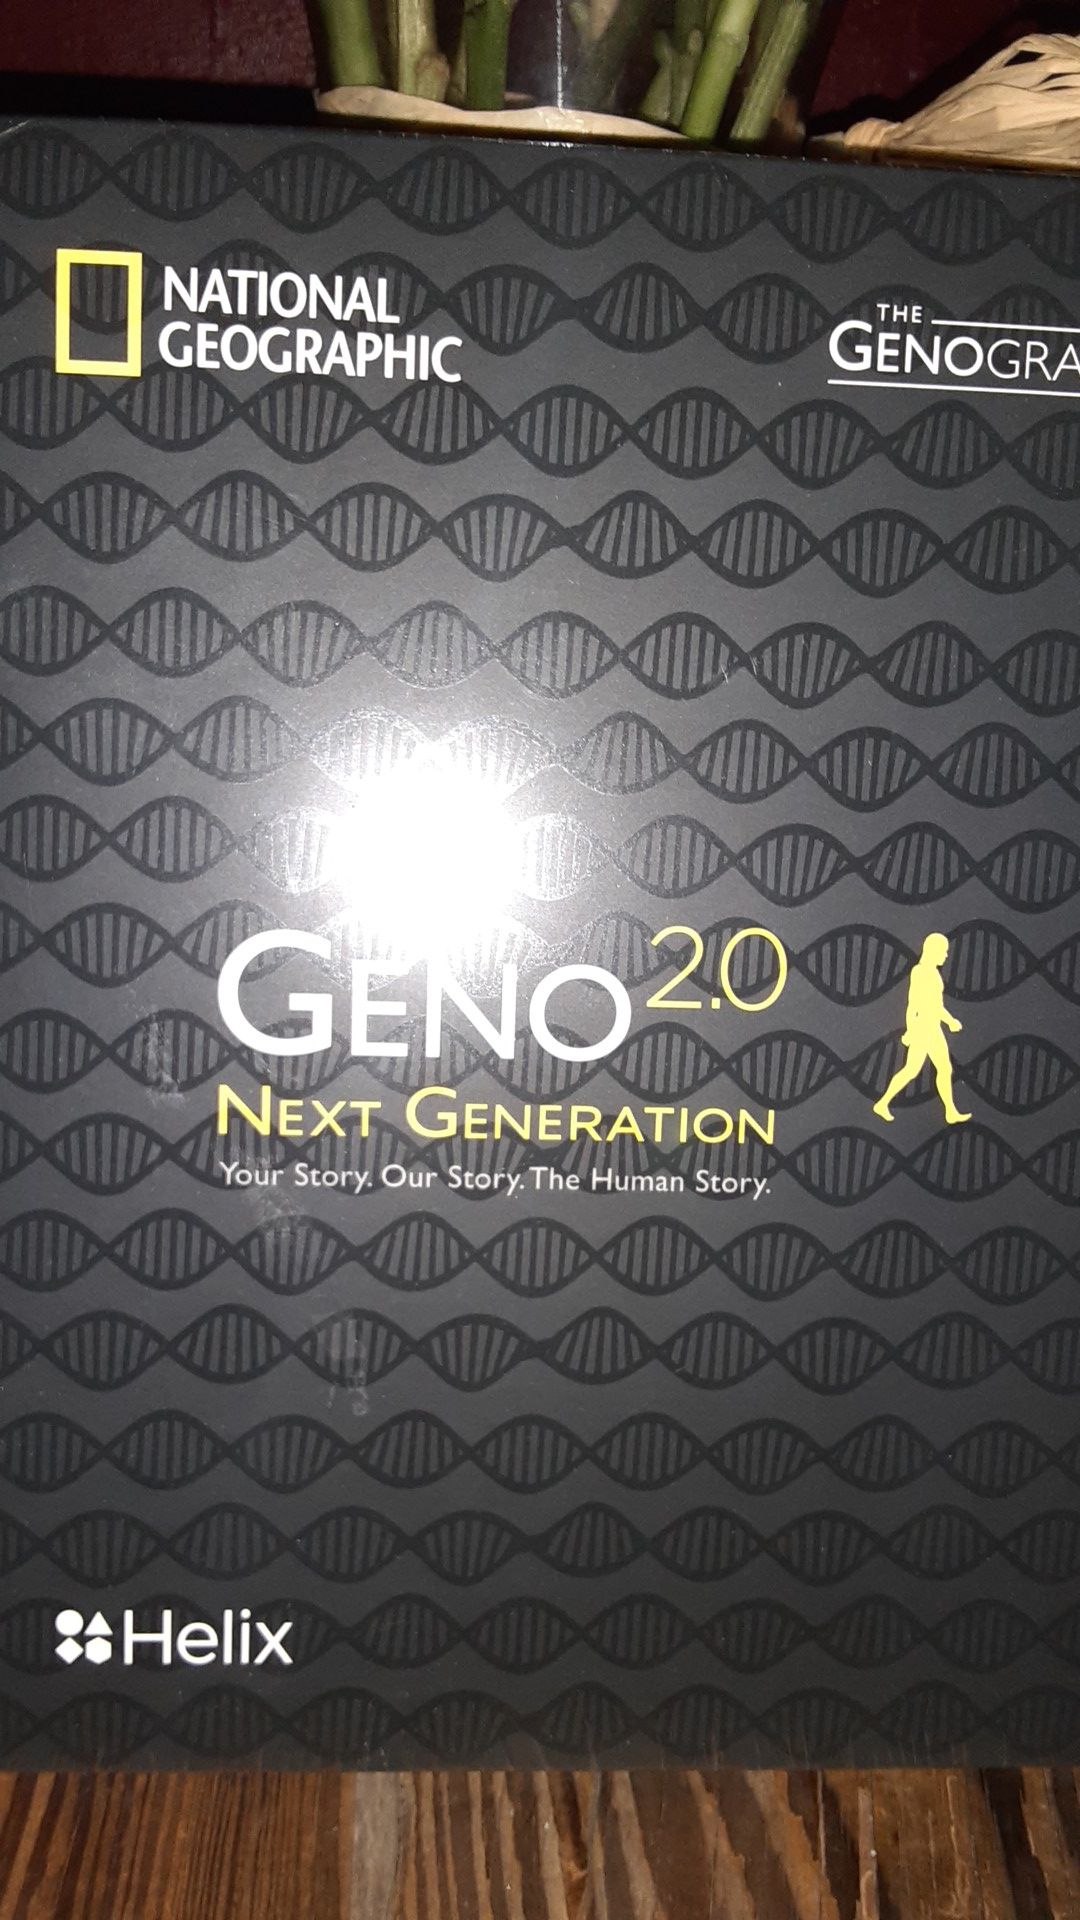 New National Geographic Geno 2.0